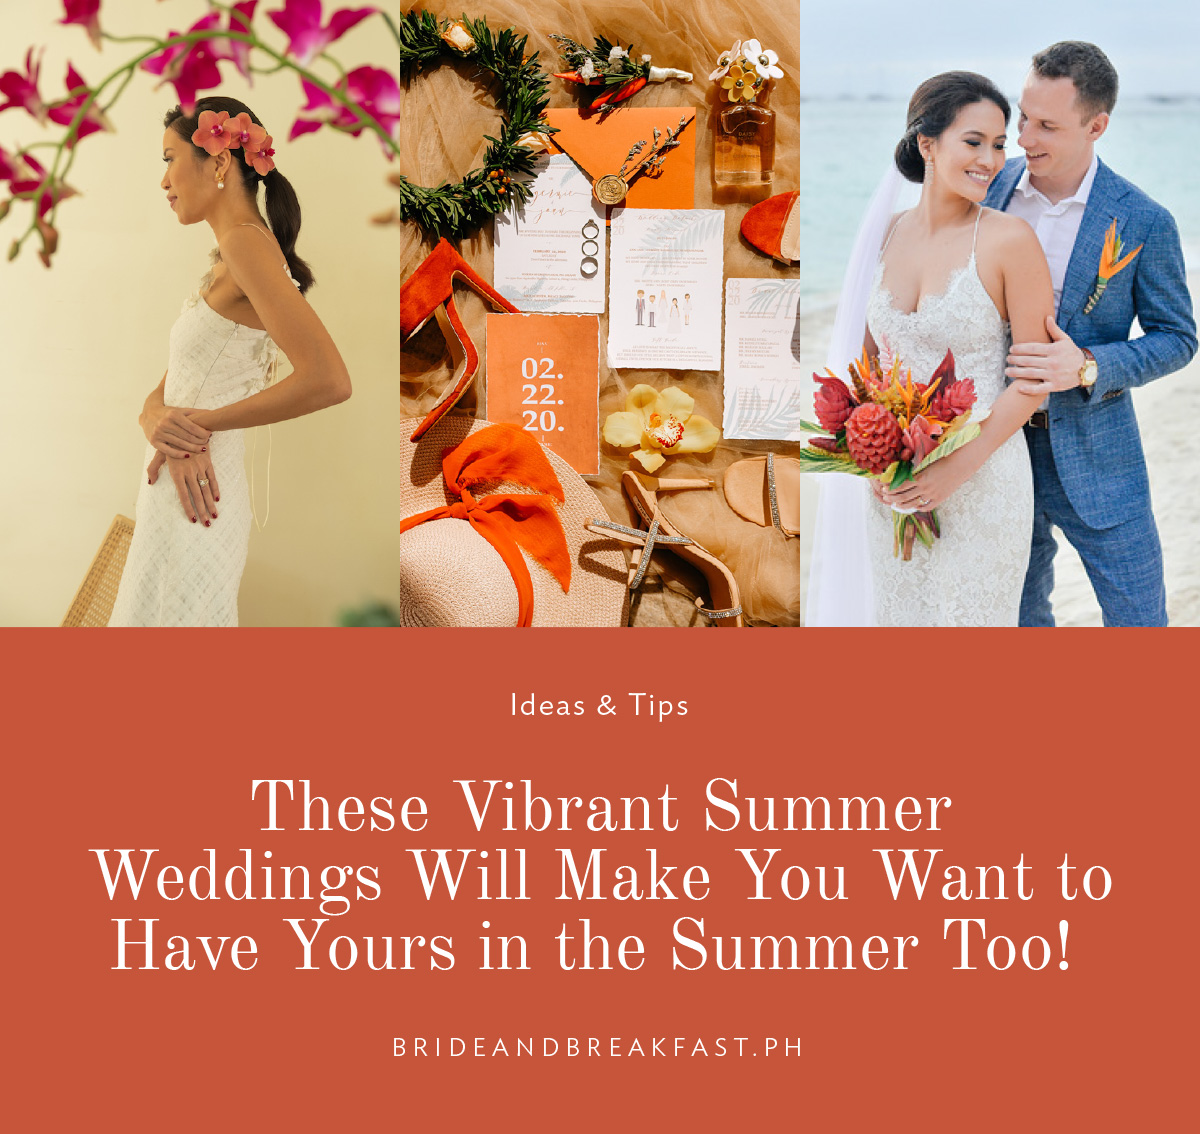 These Vibrant Summer Weddings Will Make You Want to Have Yours in the Summer Too!